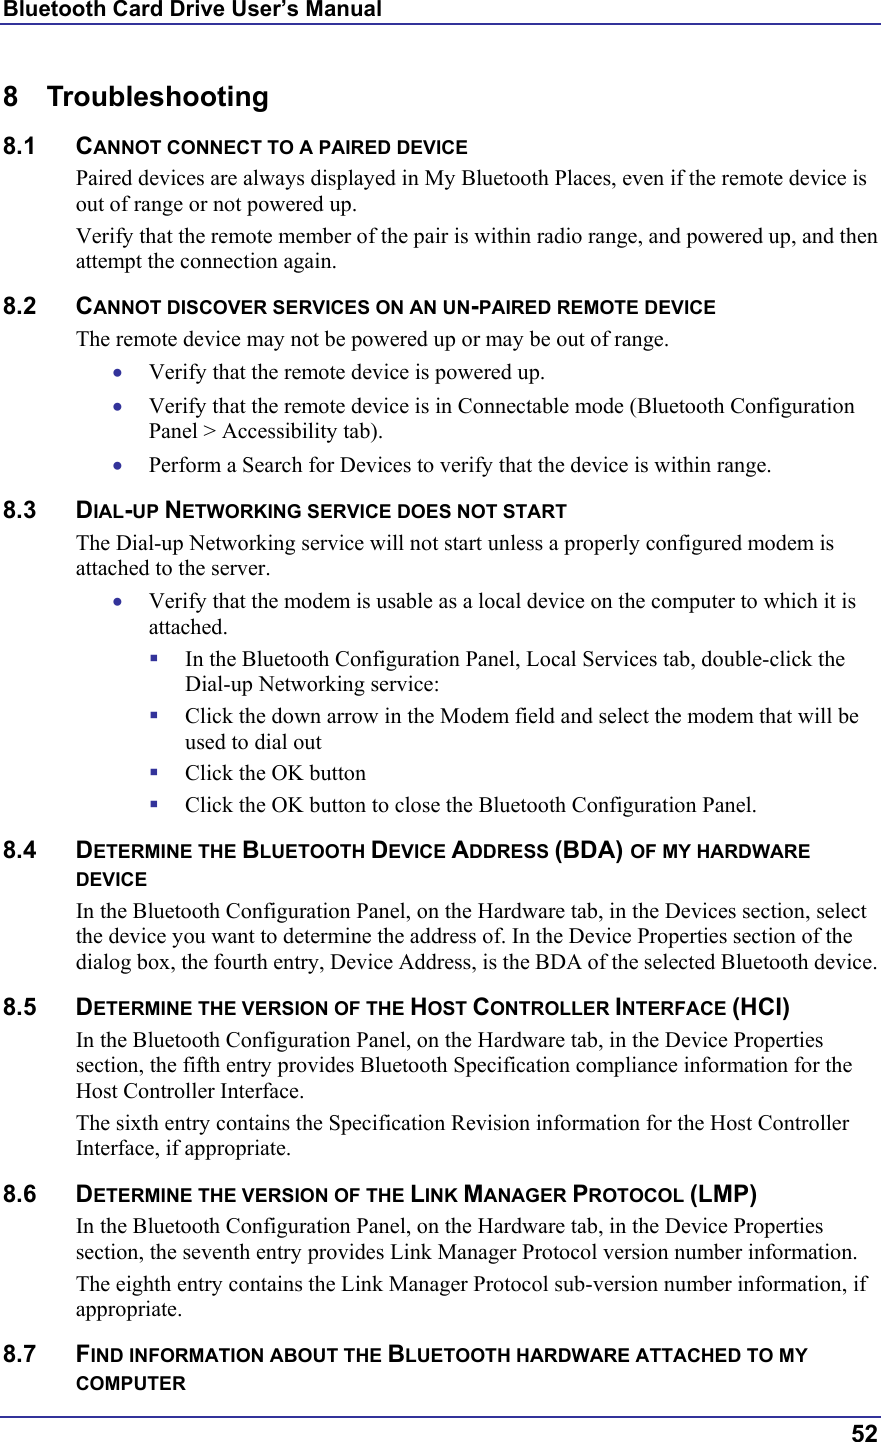 Bluetooth Card Drive User’s Manual  52 8 Troubleshooting 8.1 CANNOT CONNECT TO A PAIRED DEVICE Paired devices are always displayed in My Bluetooth Places, even if the remote device is out of range or not powered up. Verify that the remote member of the pair is within radio range, and powered up, and then attempt the connection again. 8.2 CANNOT DISCOVER SERVICES ON AN UN-PAIRED REMOTE DEVICE The remote device may not be powered up or may be out of range. •  Verify that the remote device is powered up. •  Verify that the remote device is in Connectable mode (Bluetooth Configuration Panel &gt; Accessibility tab). •  Perform a Search for Devices to verify that the device is within range. 8.3 DIAL-UP NETWORKING SERVICE DOES NOT START The Dial-up Networking service will not start unless a properly configured modem is attached to the server.  •  Verify that the modem is usable as a local device on the computer to which it is attached.   In the Bluetooth Configuration Panel, Local Services tab, double-click the Dial-up Networking service:   Click the down arrow in the Modem field and select the modem that will be used to dial out   Click the OK button   Click the OK button to close the Bluetooth Configuration Panel. 8.4 DETERMINE THE BLUETOOTH DEVICE ADDRESS (BDA) OF MY HARDWARE DEVICE In the Bluetooth Configuration Panel, on the Hardware tab, in the Devices section, select the device you want to determine the address of. In the Device Properties section of the dialog box, the fourth entry, Device Address, is the BDA of the selected Bluetooth device. 8.5 DETERMINE THE VERSION OF THE HOST CONTROLLER INTERFACE (HCI) In the Bluetooth Configuration Panel, on the Hardware tab, in the Device Properties section, the fifth entry provides Bluetooth Specification compliance information for the Host Controller Interface. The sixth entry contains the Specification Revision information for the Host Controller Interface, if appropriate. 8.6 DETERMINE THE VERSION OF THE LINK MANAGER PROTOCOL (LMP) In the Bluetooth Configuration Panel, on the Hardware tab, in the Device Properties section, the seventh entry provides Link Manager Protocol version number information. The eighth entry contains the Link Manager Protocol sub-version number information, if appropriate. 8.7 FIND INFORMATION ABOUT THE BLUETOOTH HARDWARE ATTACHED TO MY COMPUTER 